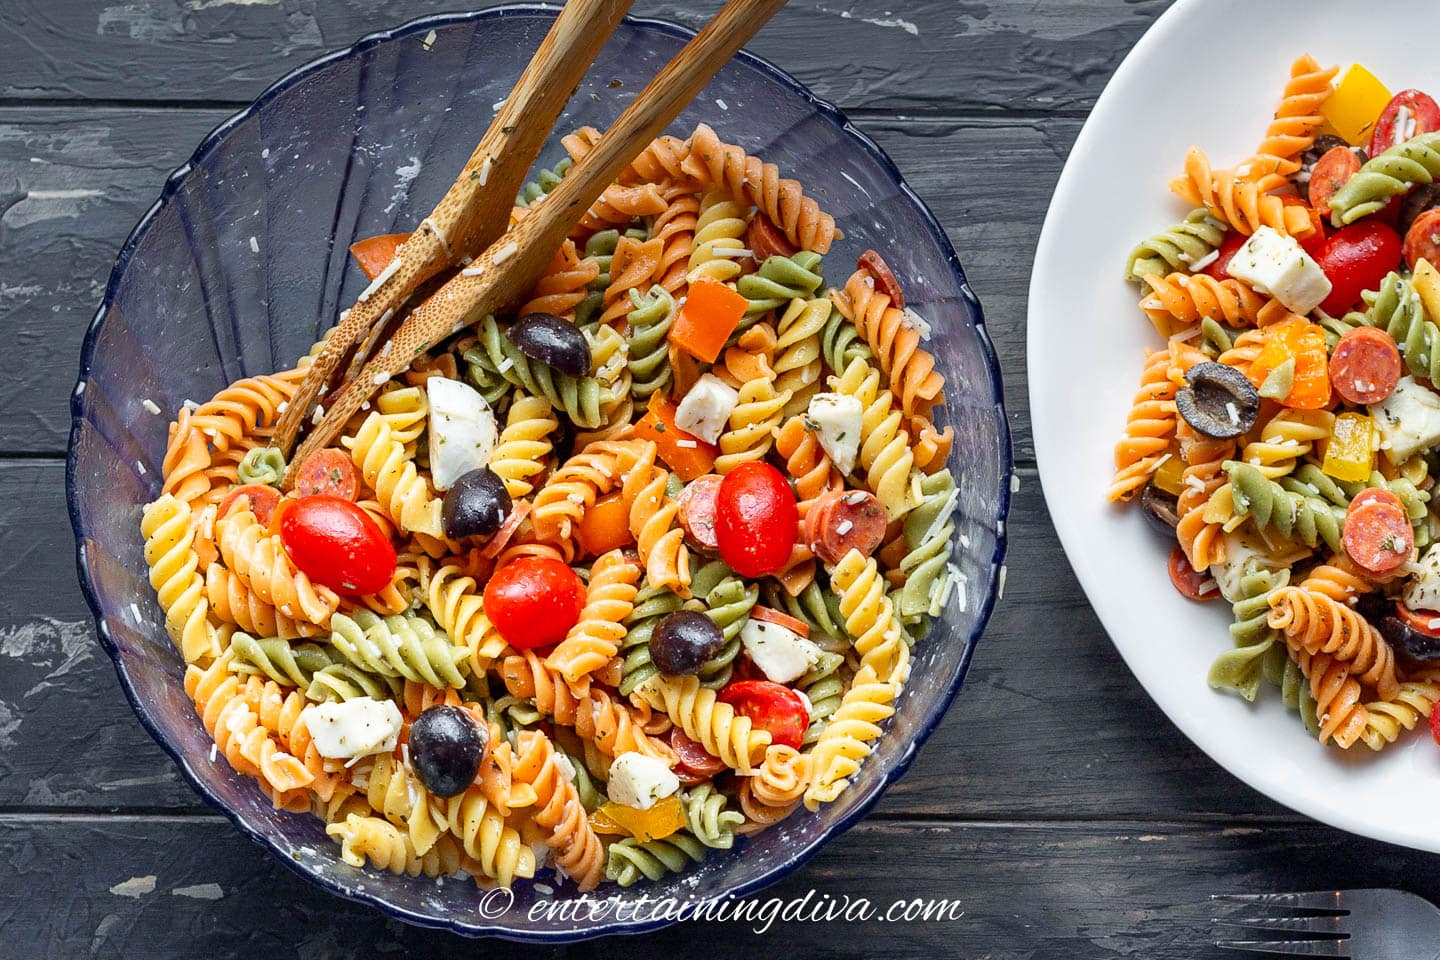 A bowl of Italian pasta salad beside a plate of it